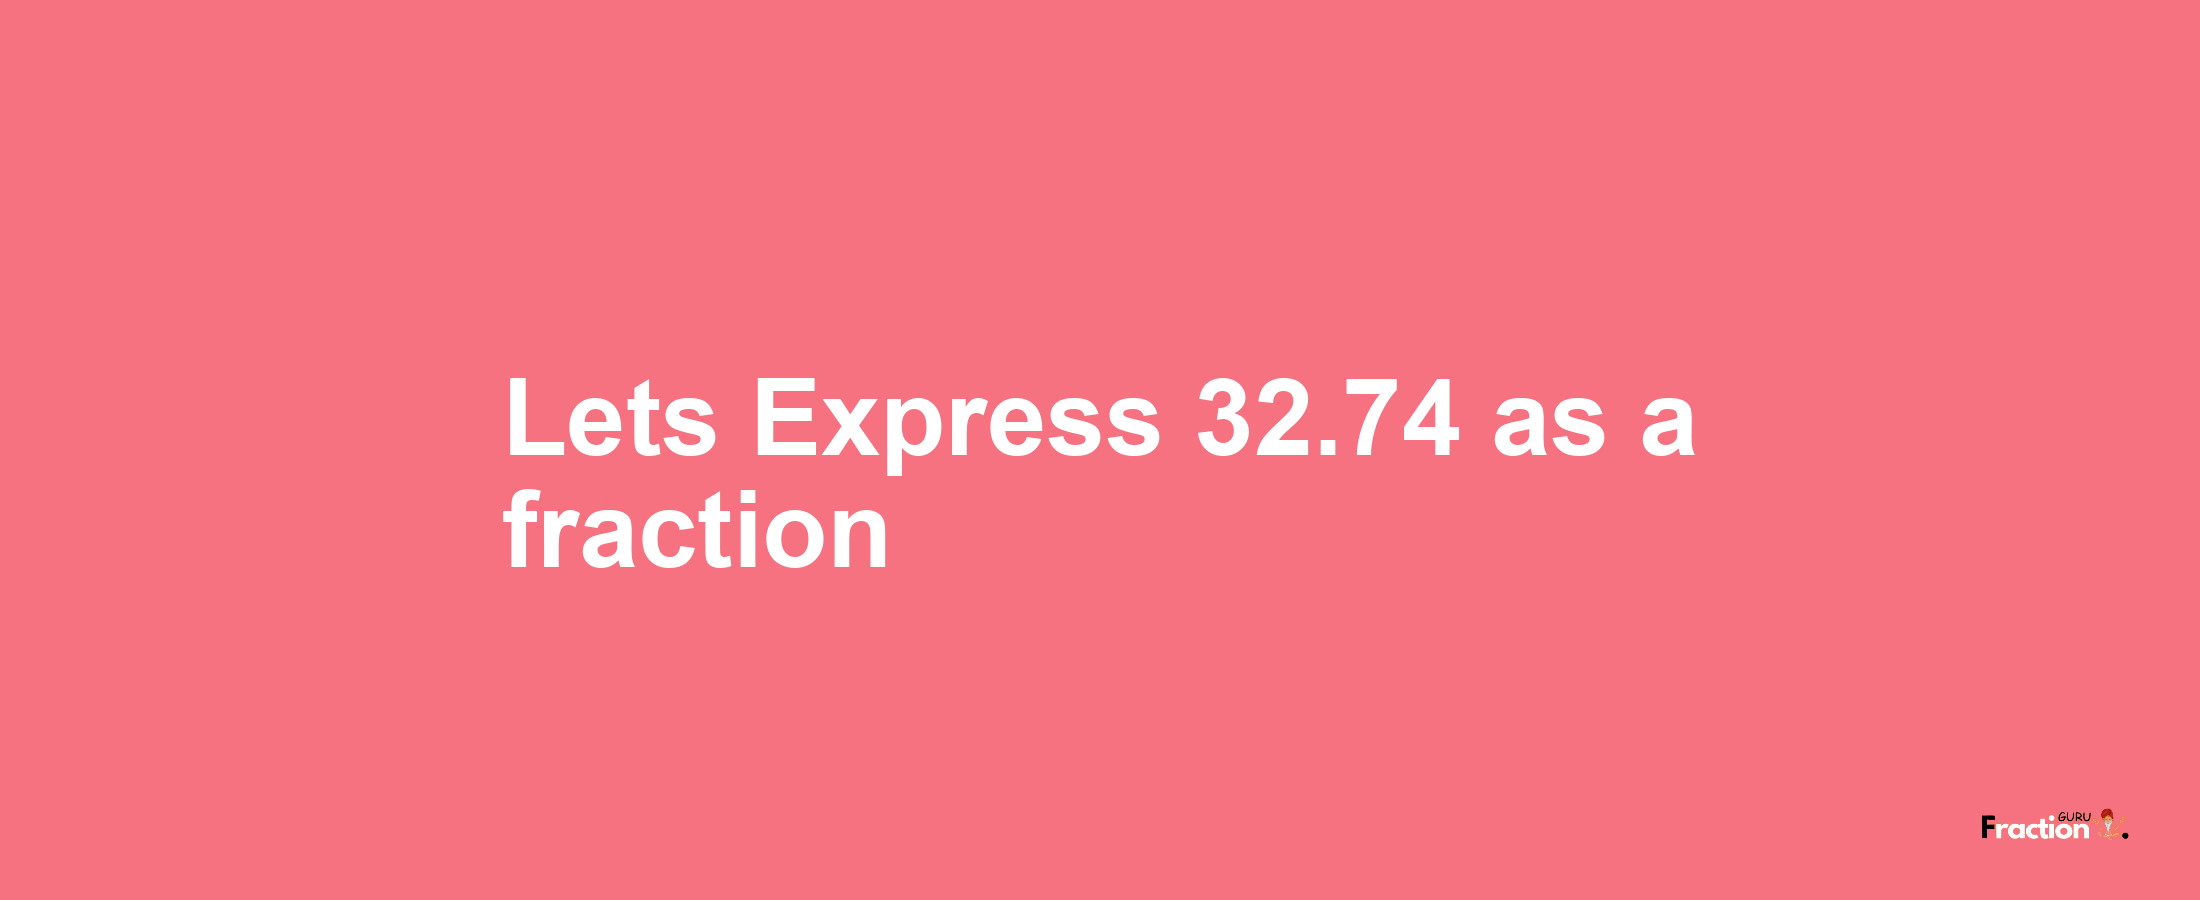 Lets Express 32.74 as afraction